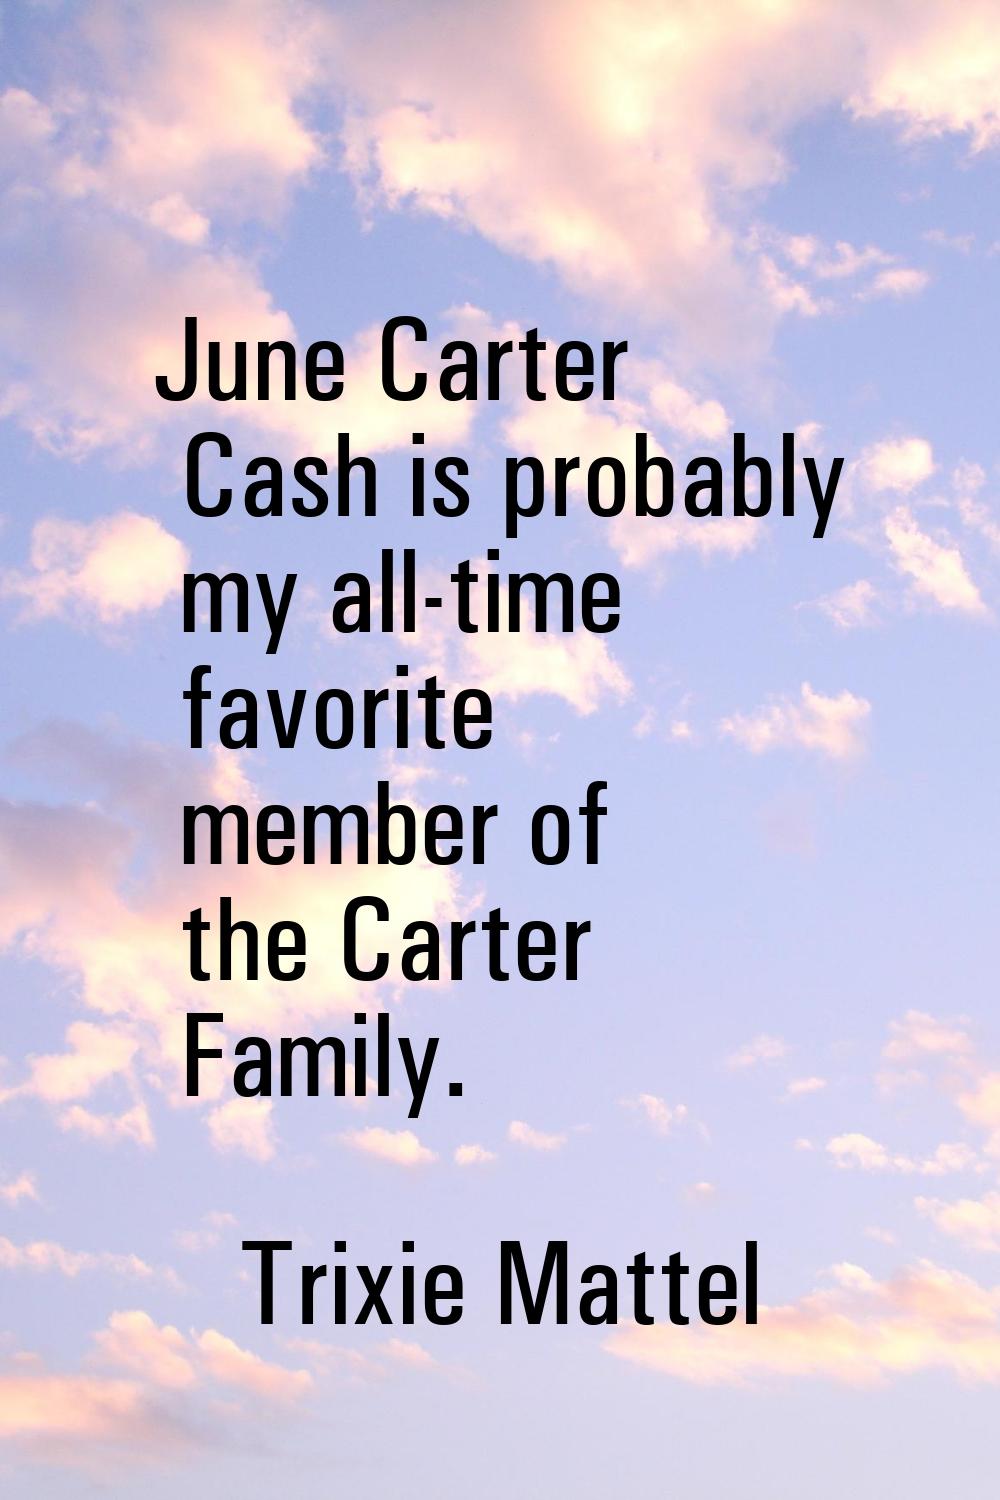 June Carter Cash is probably my all-time favorite member of the Carter Family.